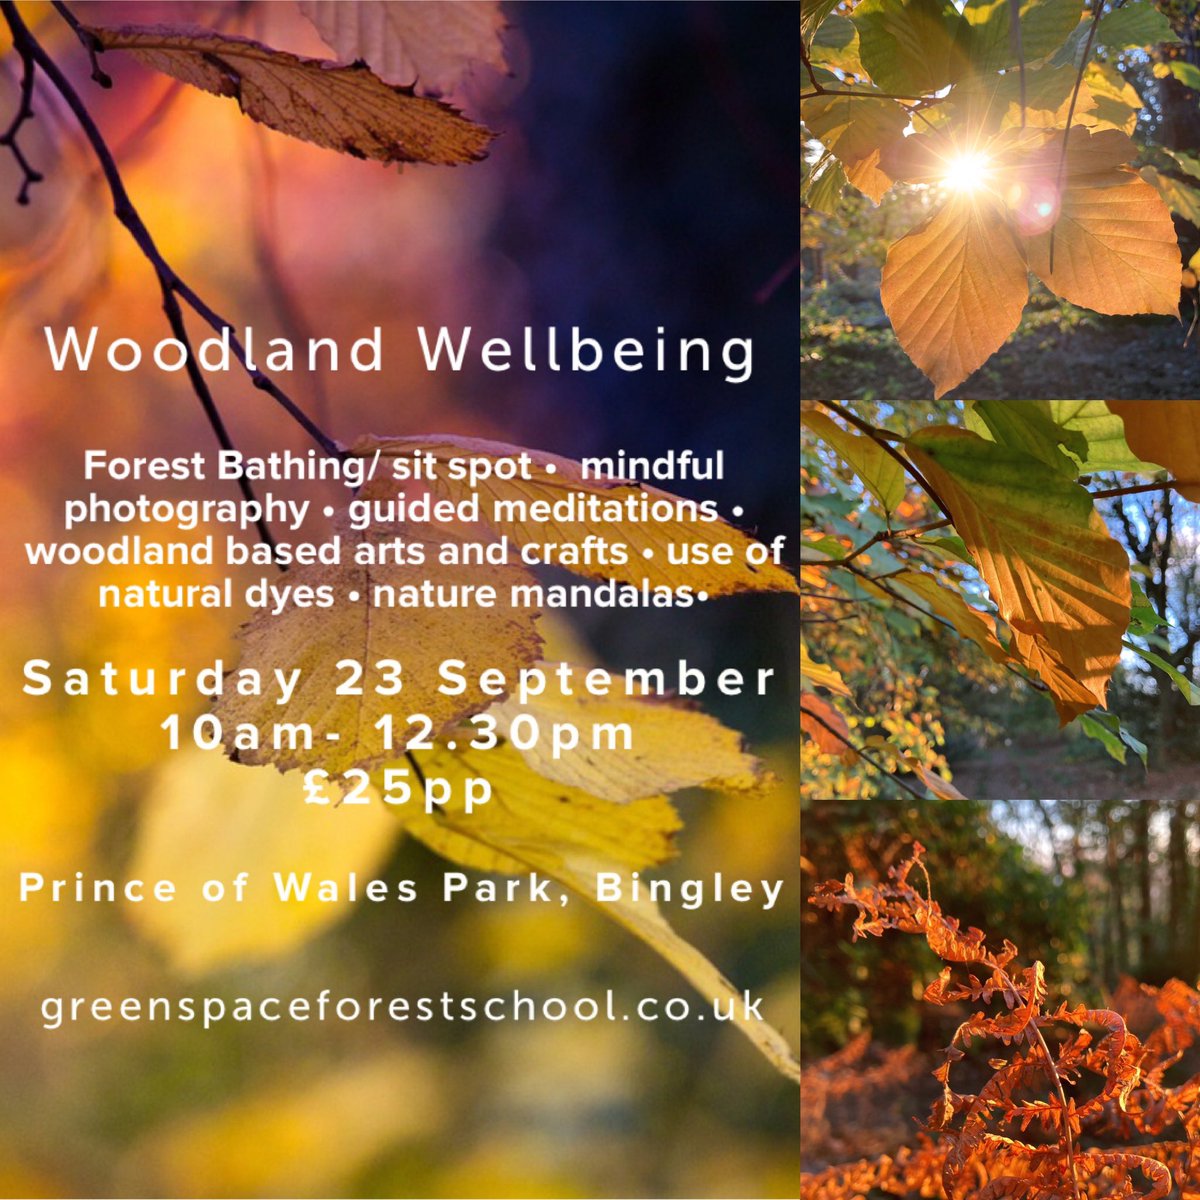 The next woodland wellbeing session at Prince of Wales Park in Bingley is on Saturday 23 September, otherwise known as the FIRST DAY OF AUTUMN! 😍🍁🐿️🍄🍂🤩
To book please visit greenspaceforestschool.co.uk
@BfdForestSchls 
#Wellbeing #sitspot #landart 
#Mindfulness #meditation